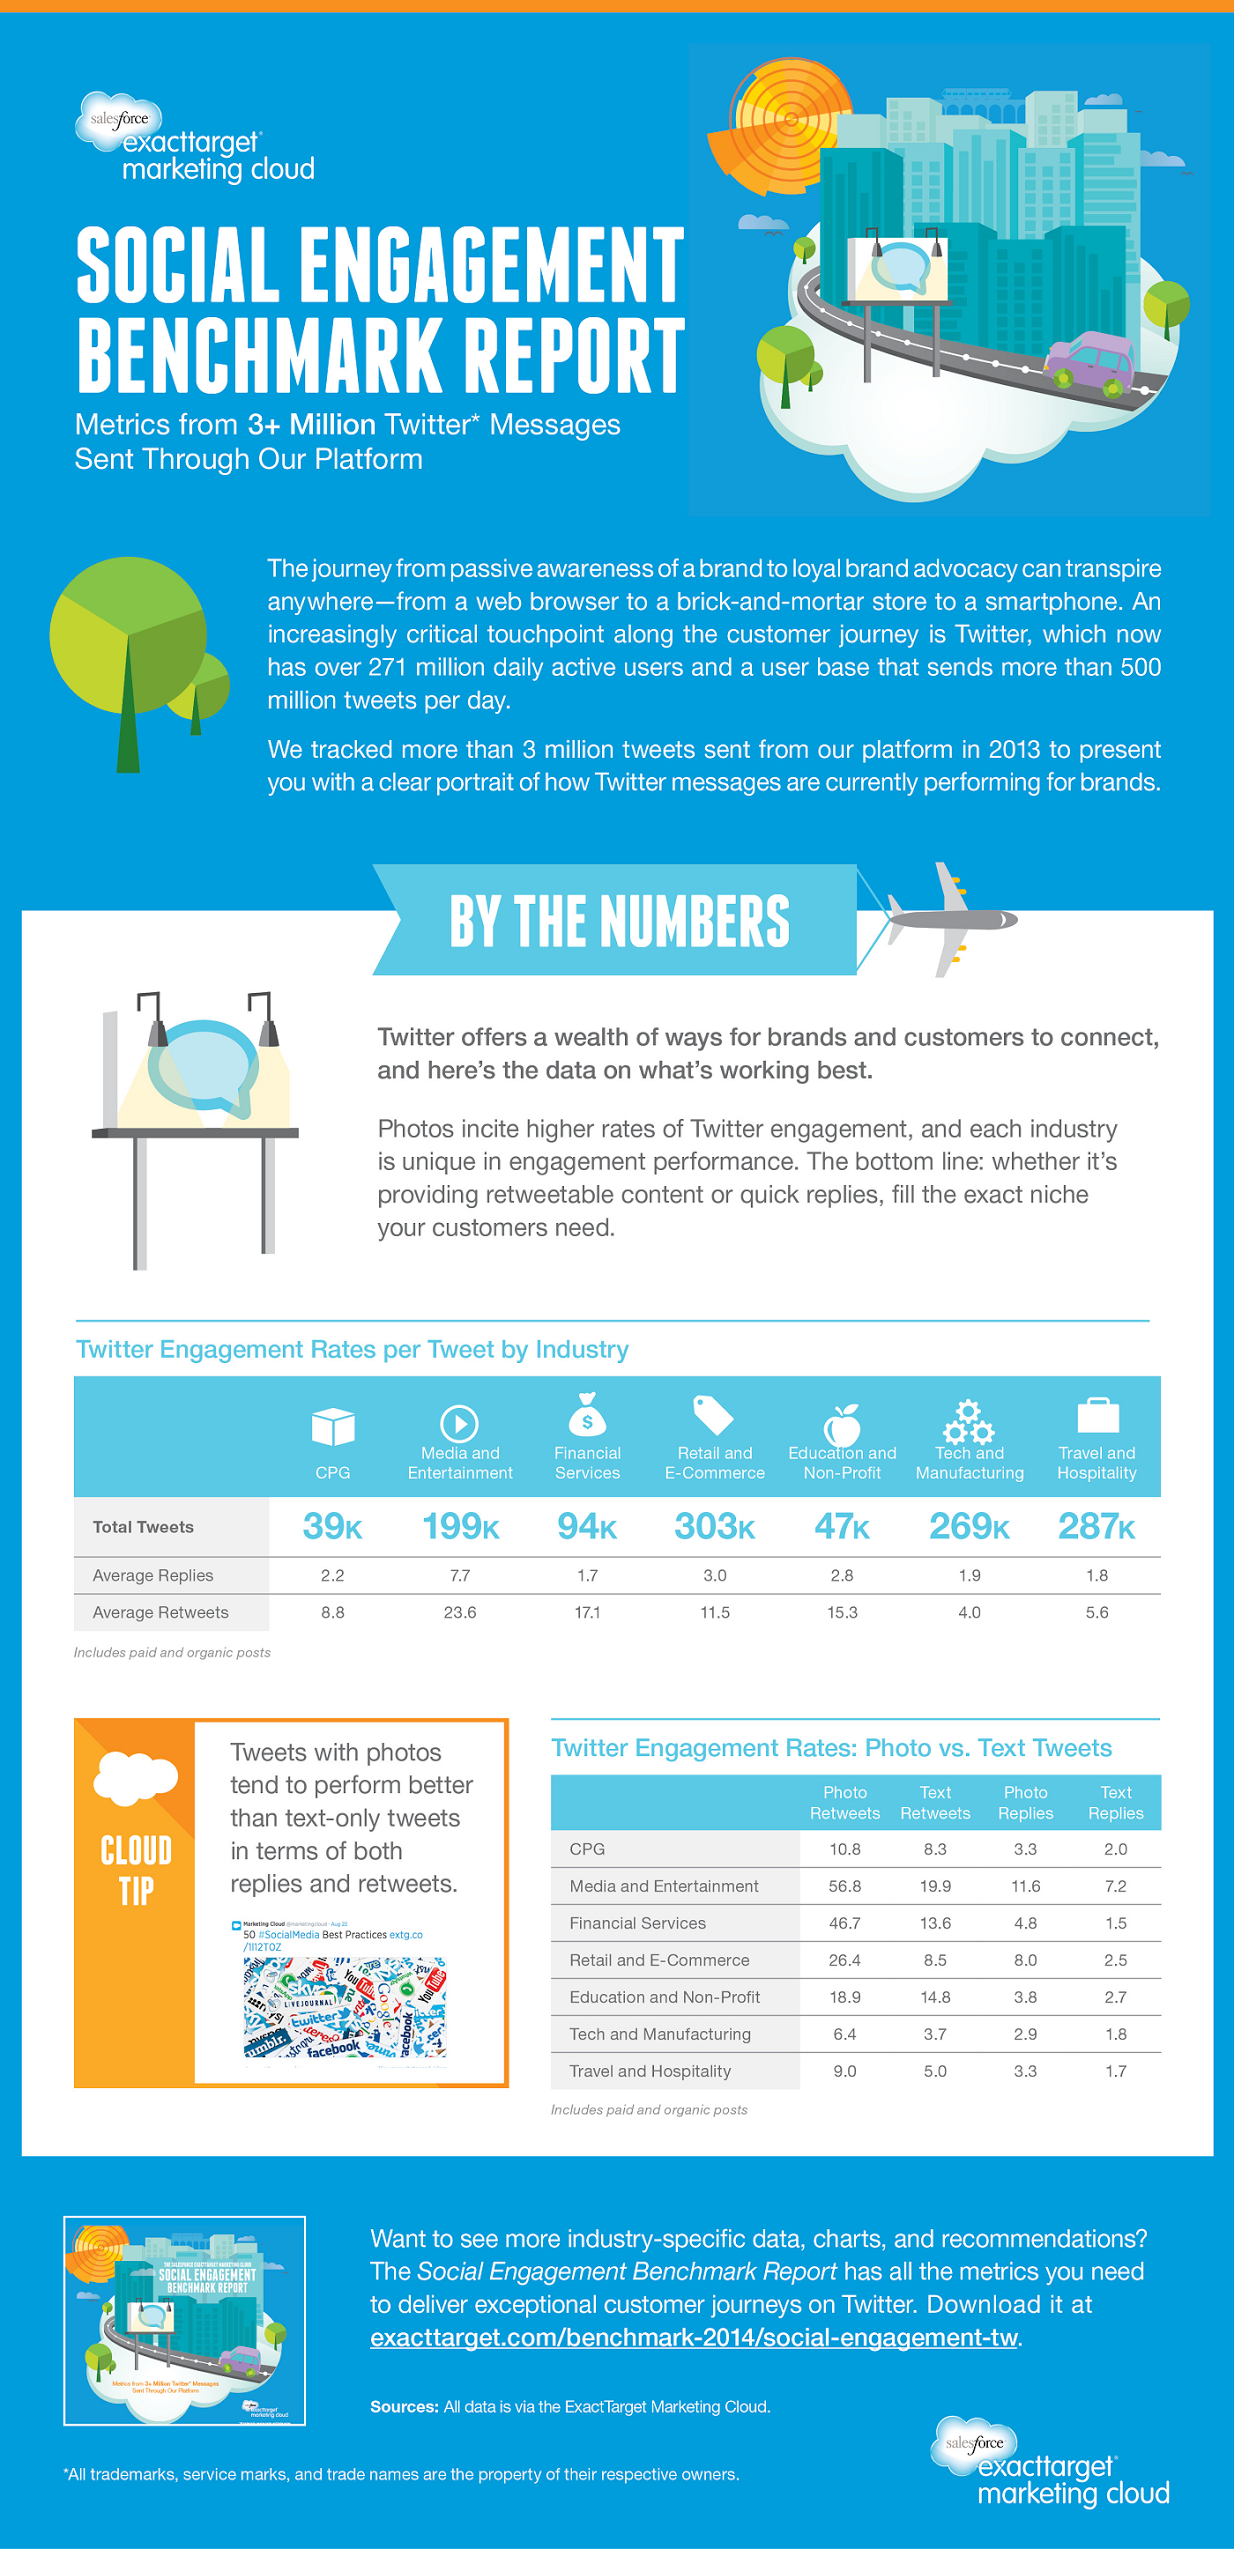 Improve your Twitter marketing strategy with these latest statistics, trends and facts